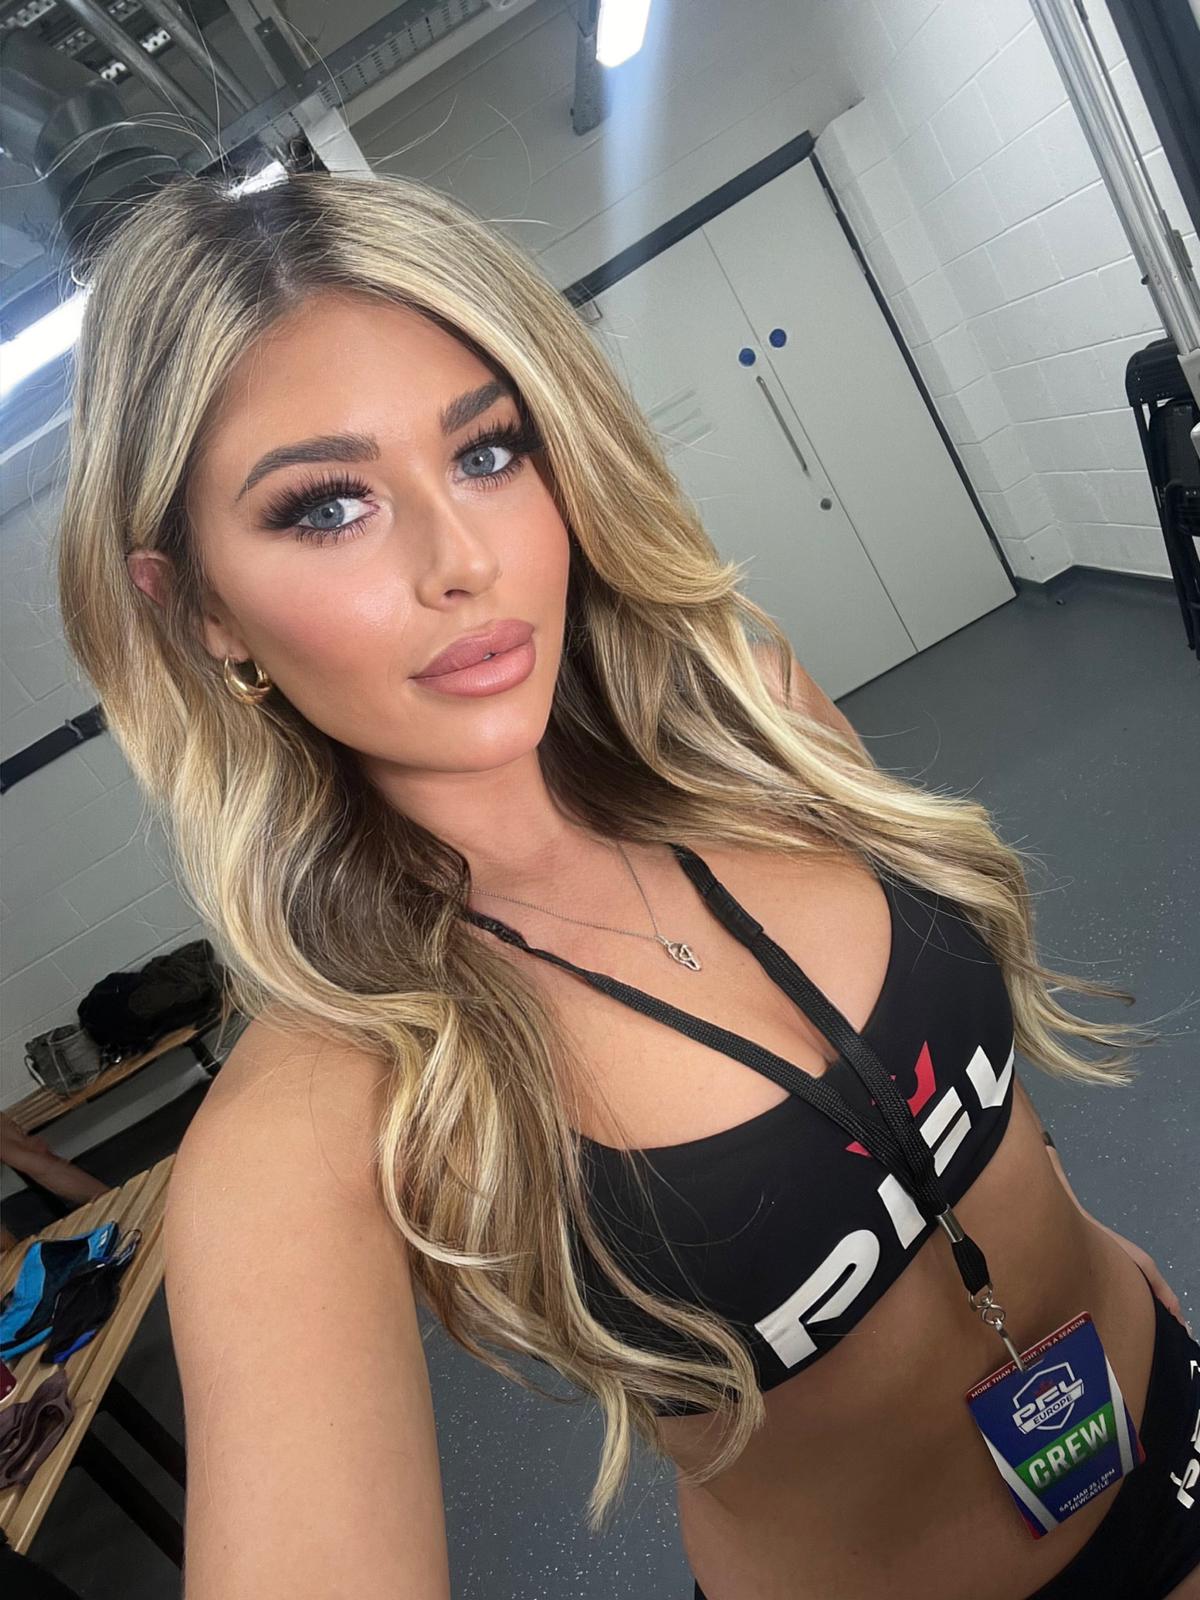 PFL Europe: Finesse Girls- After BKFC glory, Carla Jade, Melissa Whitfield and other star Ring girls welcome the Professional Fighting league to Europe